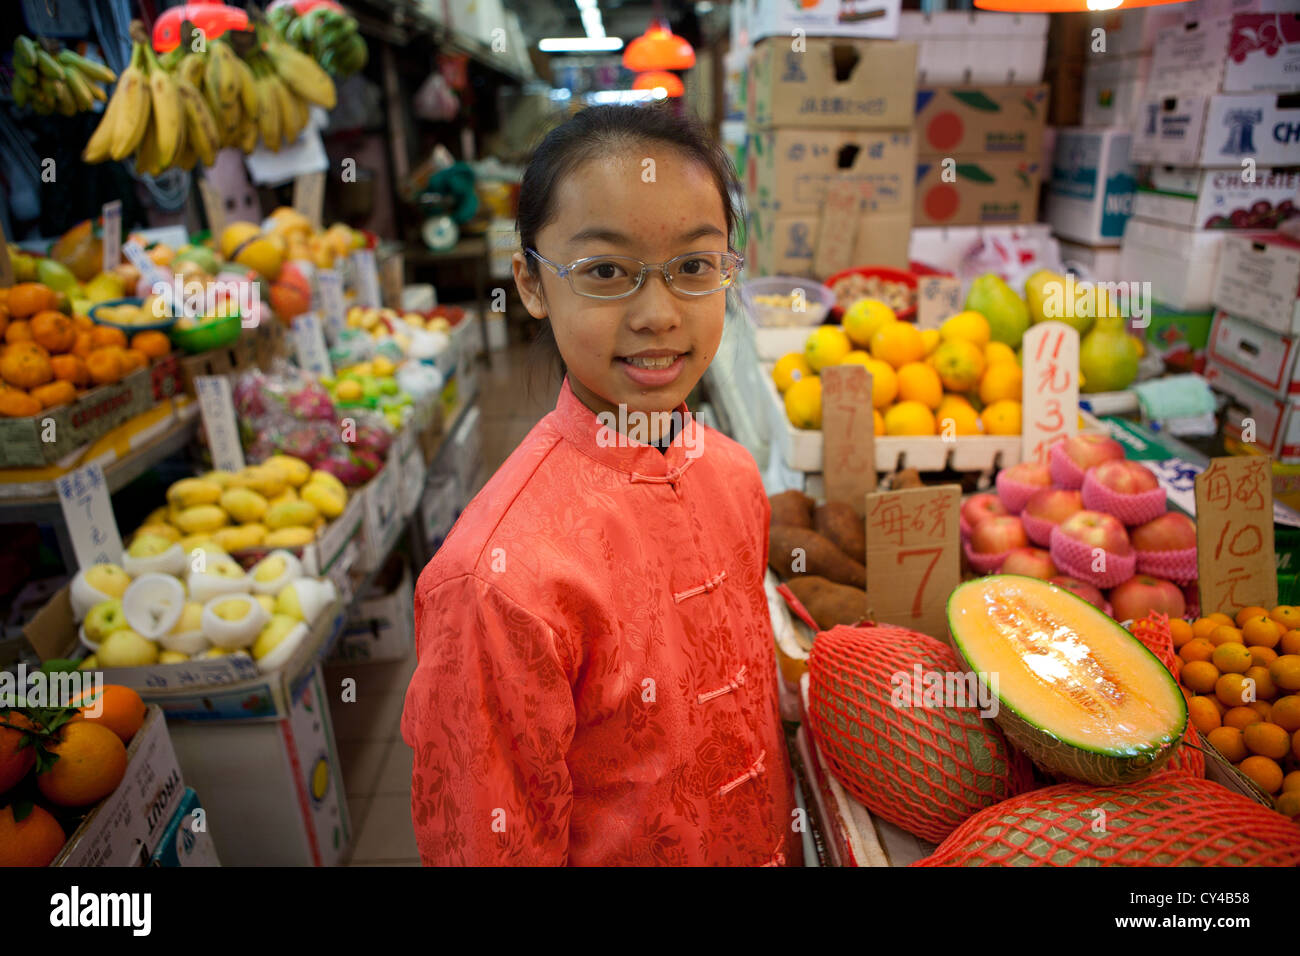 fruit and vegetable market in Hongkong, China. This image is model released (tungtung) Stock Photo